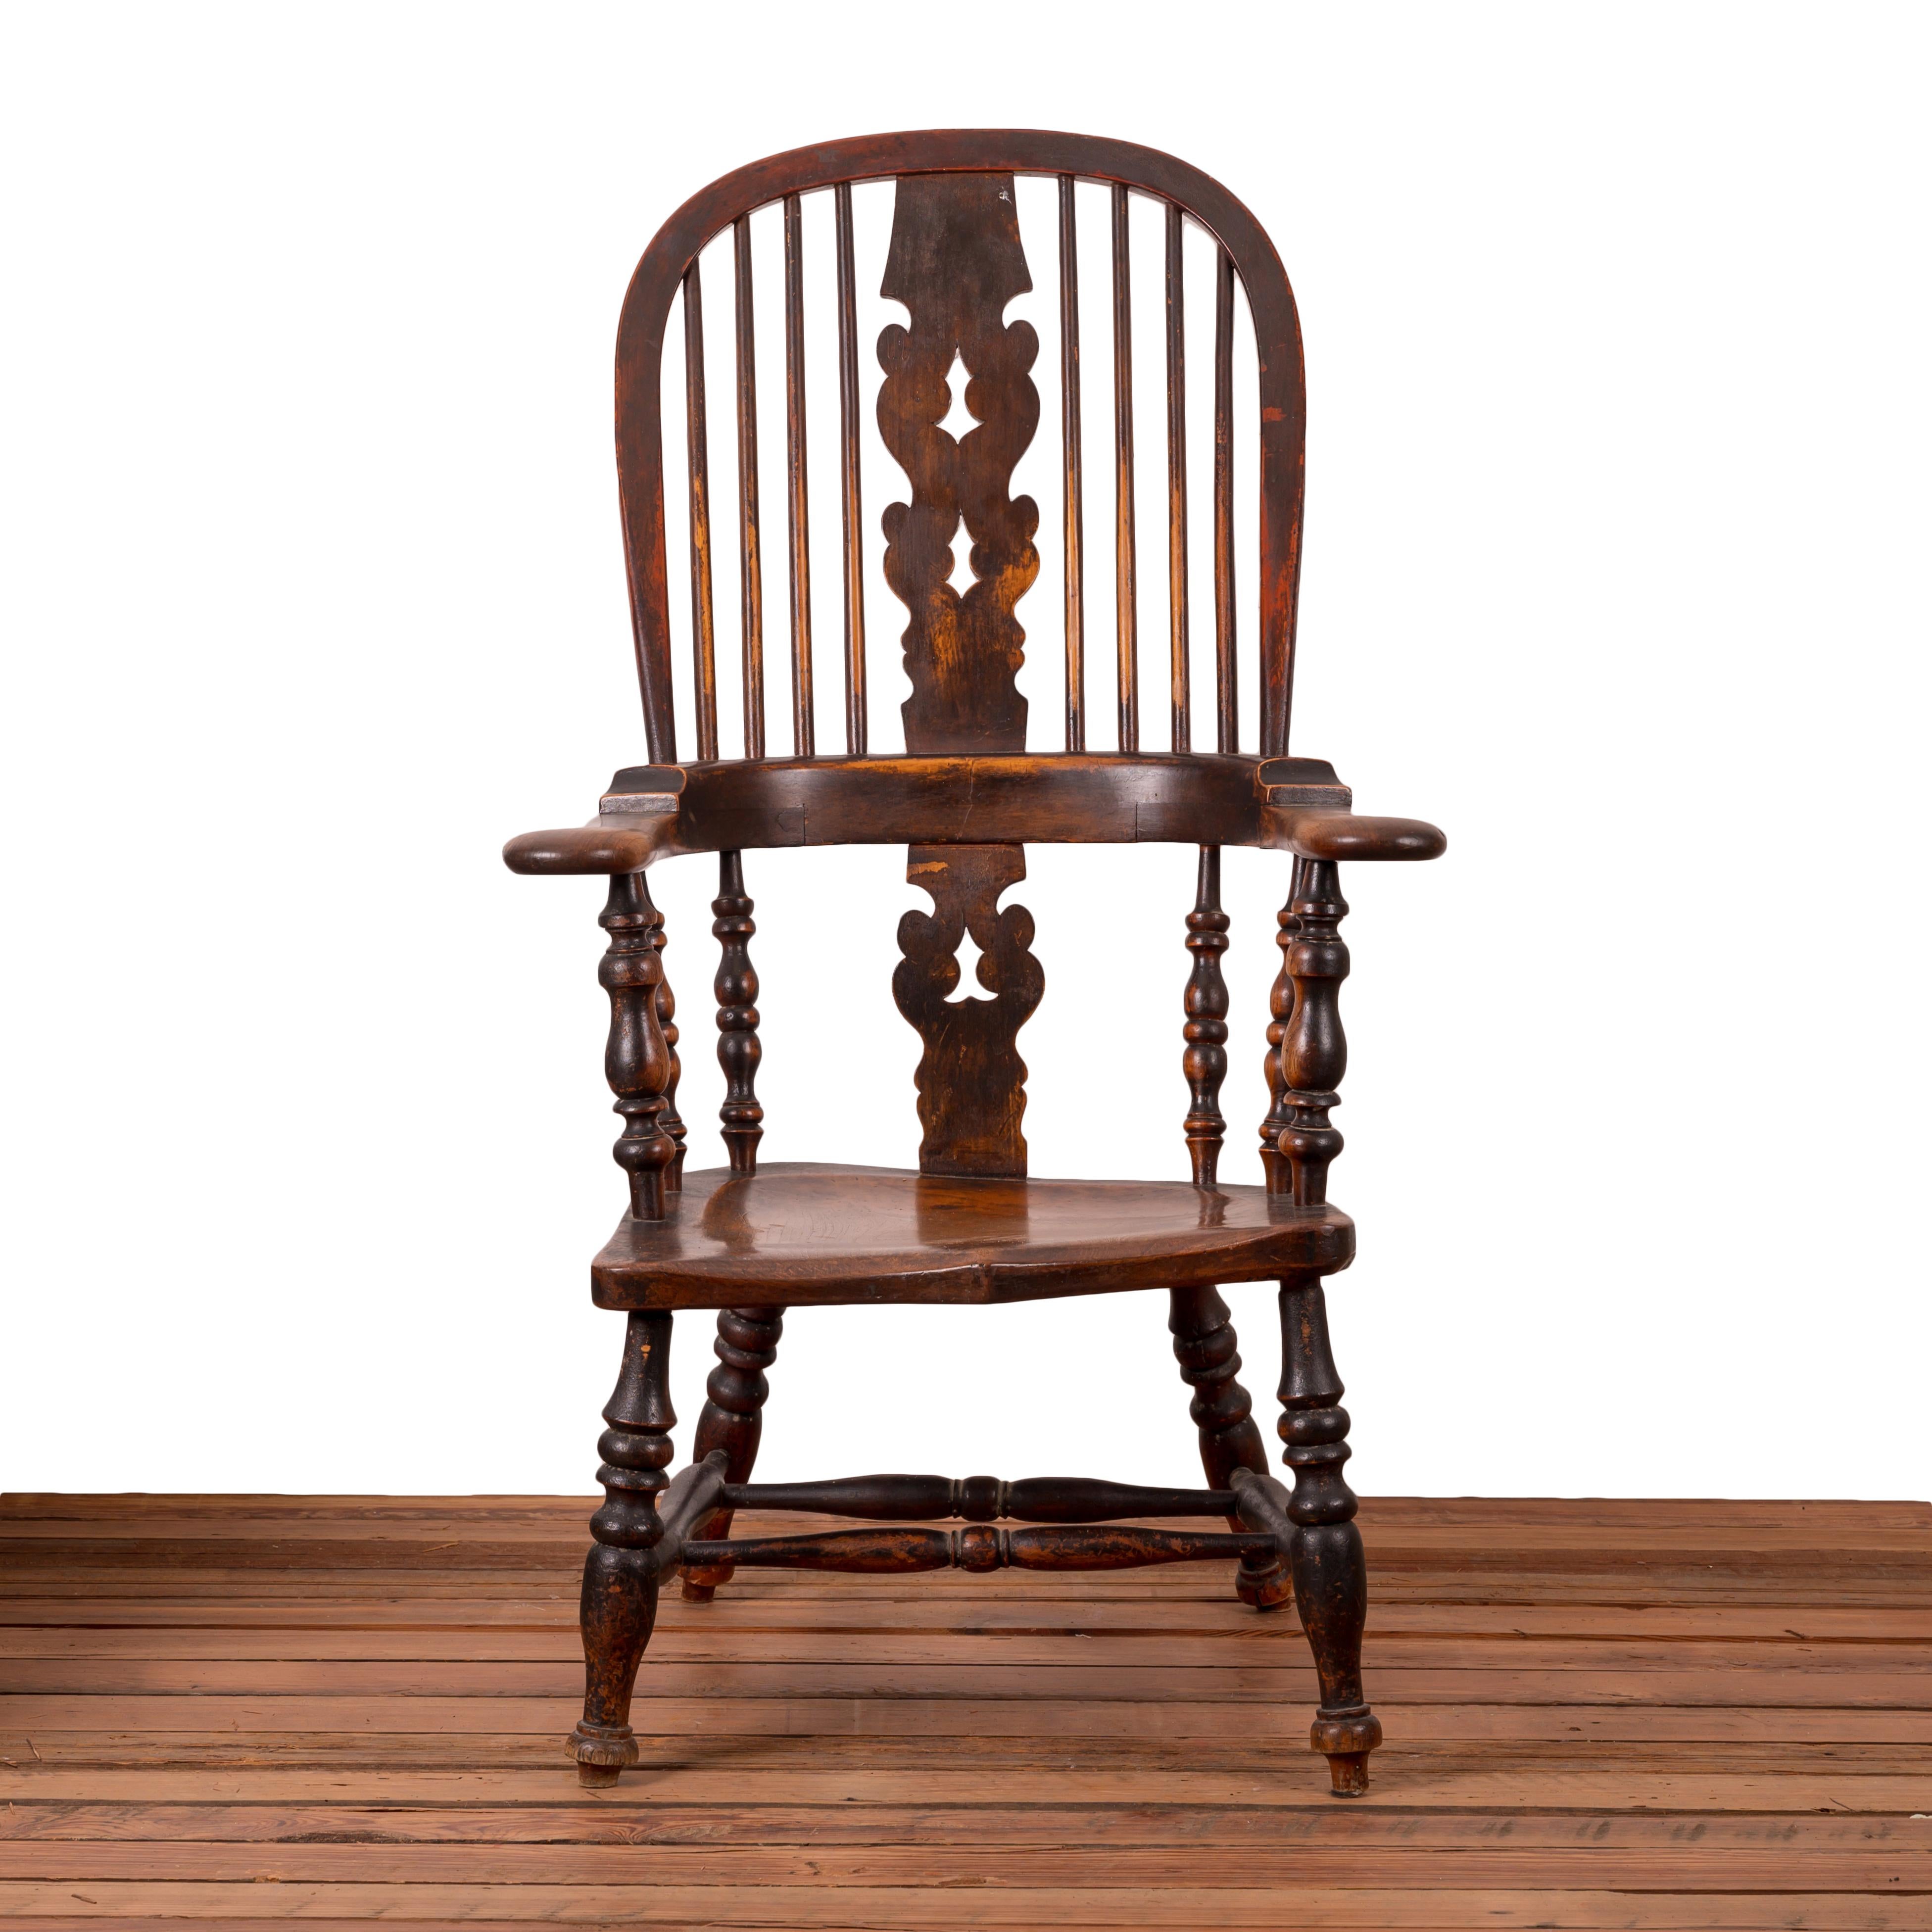 An early Victorian yew, elm and ash broad arm Windsor chair.

Great original surface.  Underside signed G.G. Barker.  Likely George G. Barker & Co. importers in Wilmington, NC, circa 1870s. 

 

24 inches wide by 25 inches deep by 41 ½ inches tall;